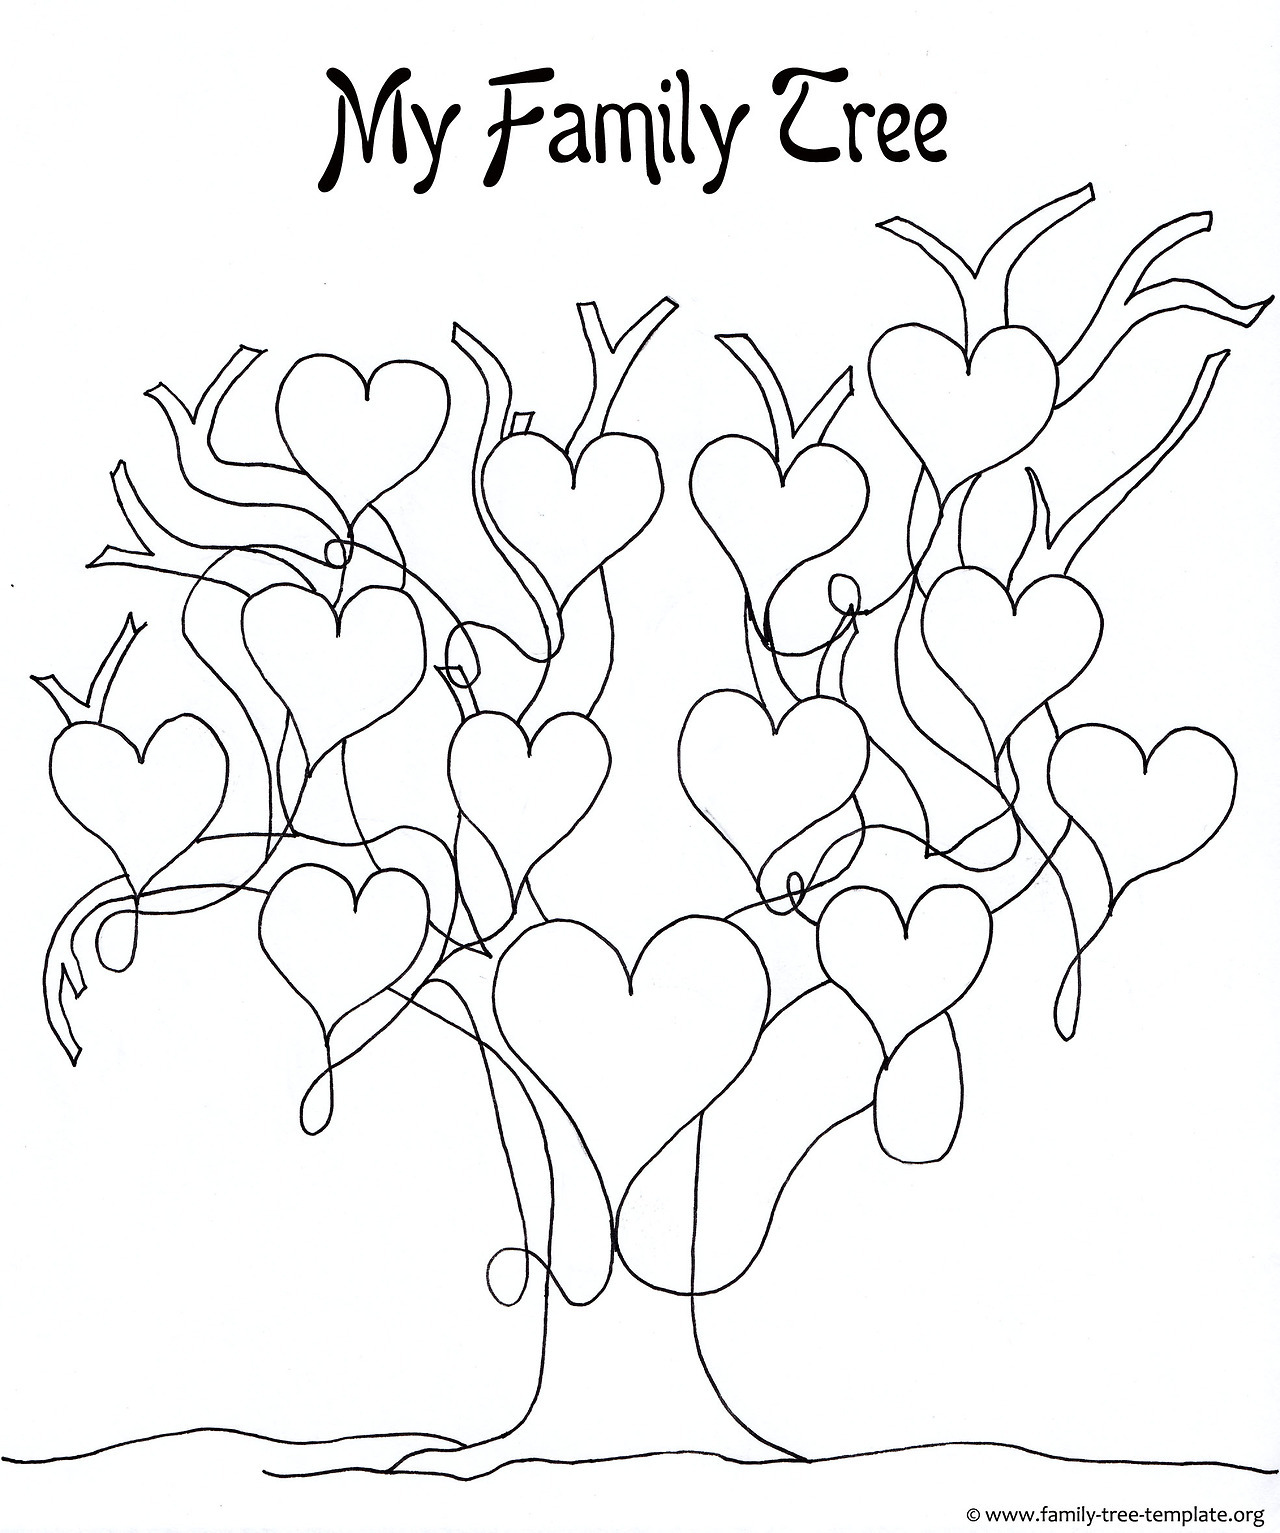 Print this I Love My Family Tree Coloring Page